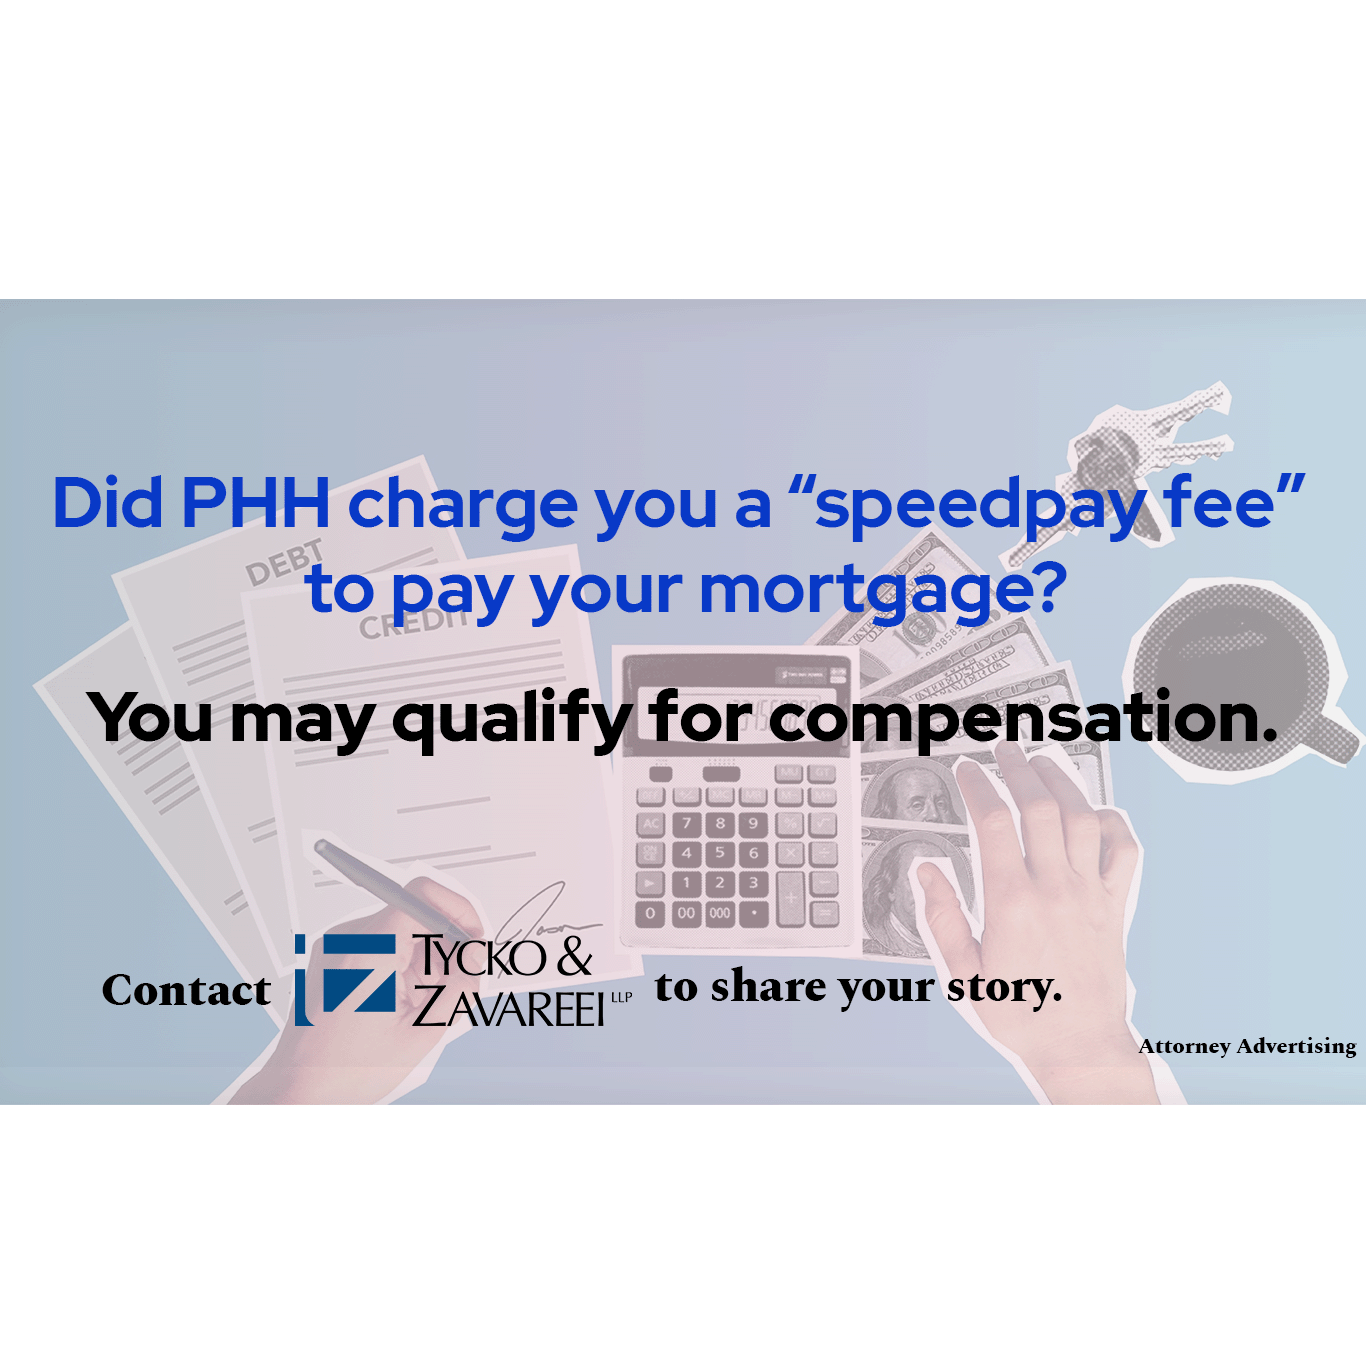 Is your mortgage servicer PHH and are they charging you fees to pay